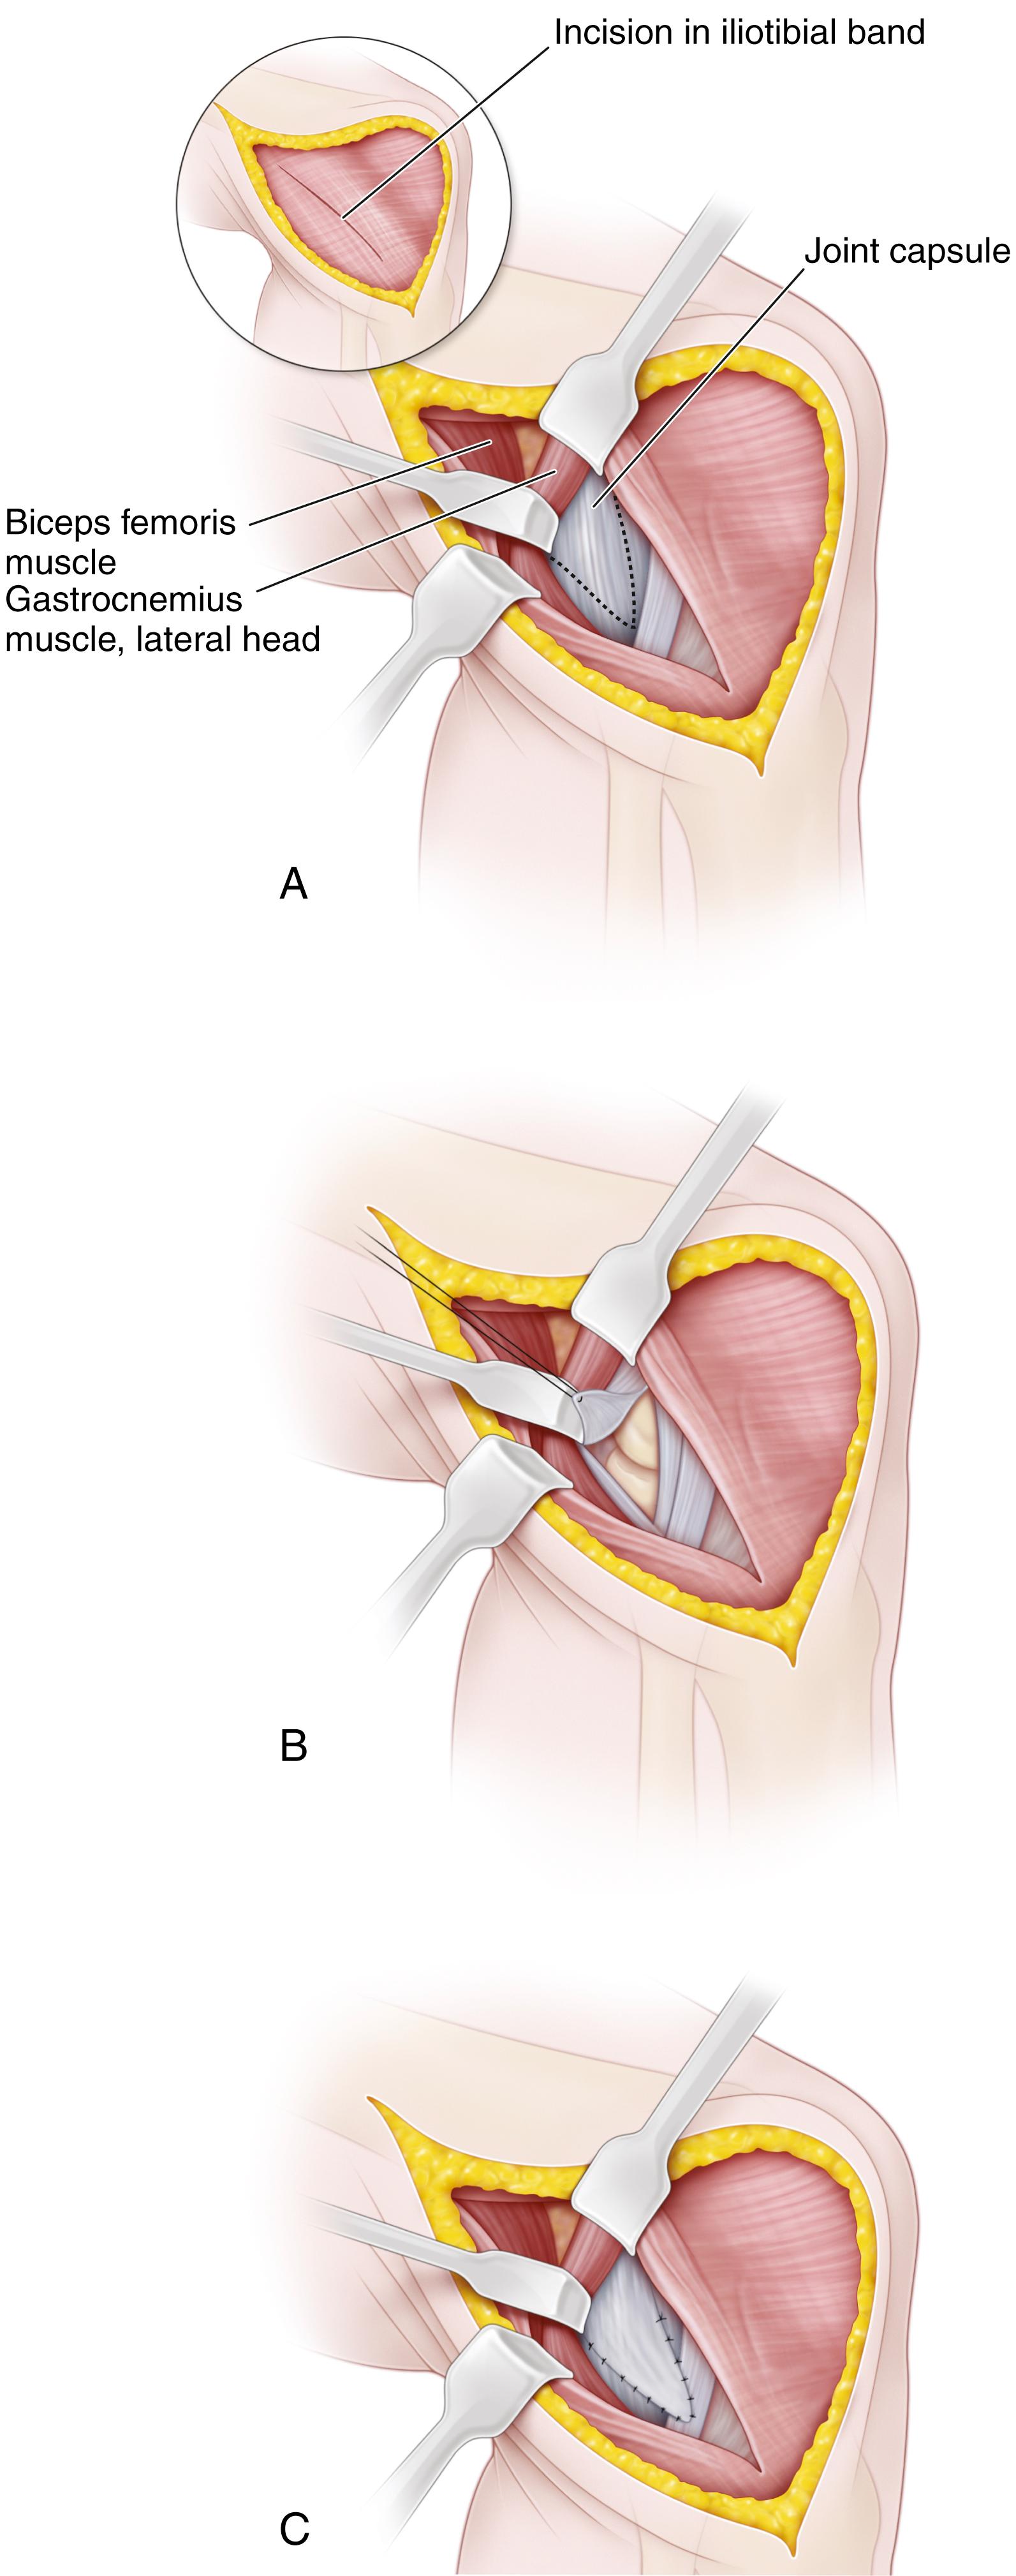 FIG. 18.8, Technique for posterior lateral capsulorrhaphy. (A) Biceps femoris and gastrocnemius are retracted posteriorly and redundant capsule identified. (B) Capsule has been incised and a portion excised. (C) Distal capsule has been advanced in a “pants-over-vest” fashion.